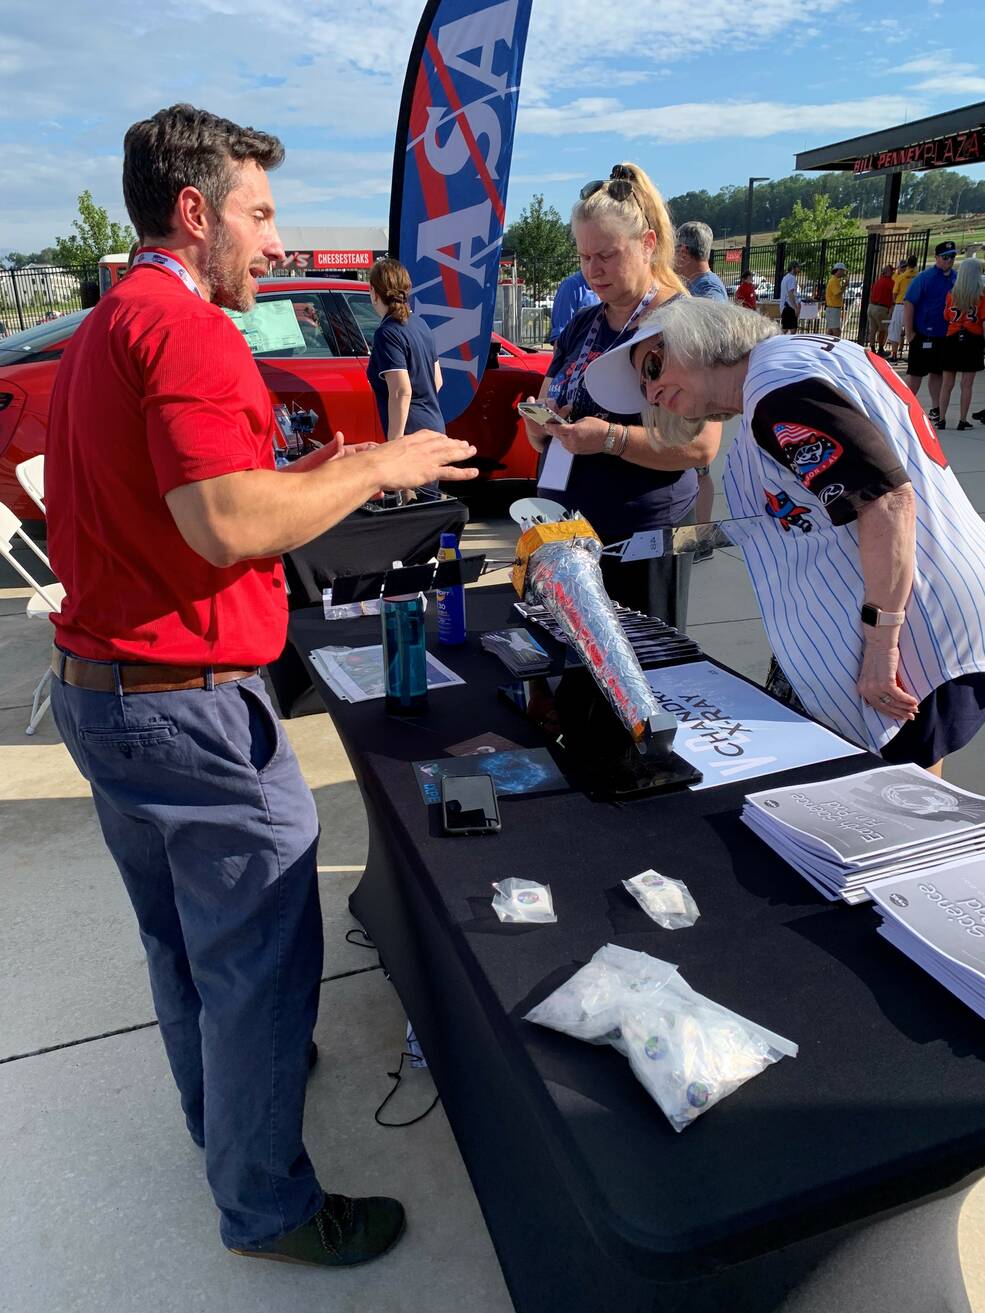 Stephen Bongiorno, left, discusses the 25th anniversary of NASAs Chandra X-ray Observatory with fans during Space Night with the Rocket City Trash Pandas, Huntsvilles minor league baseball team, Aug. 8.